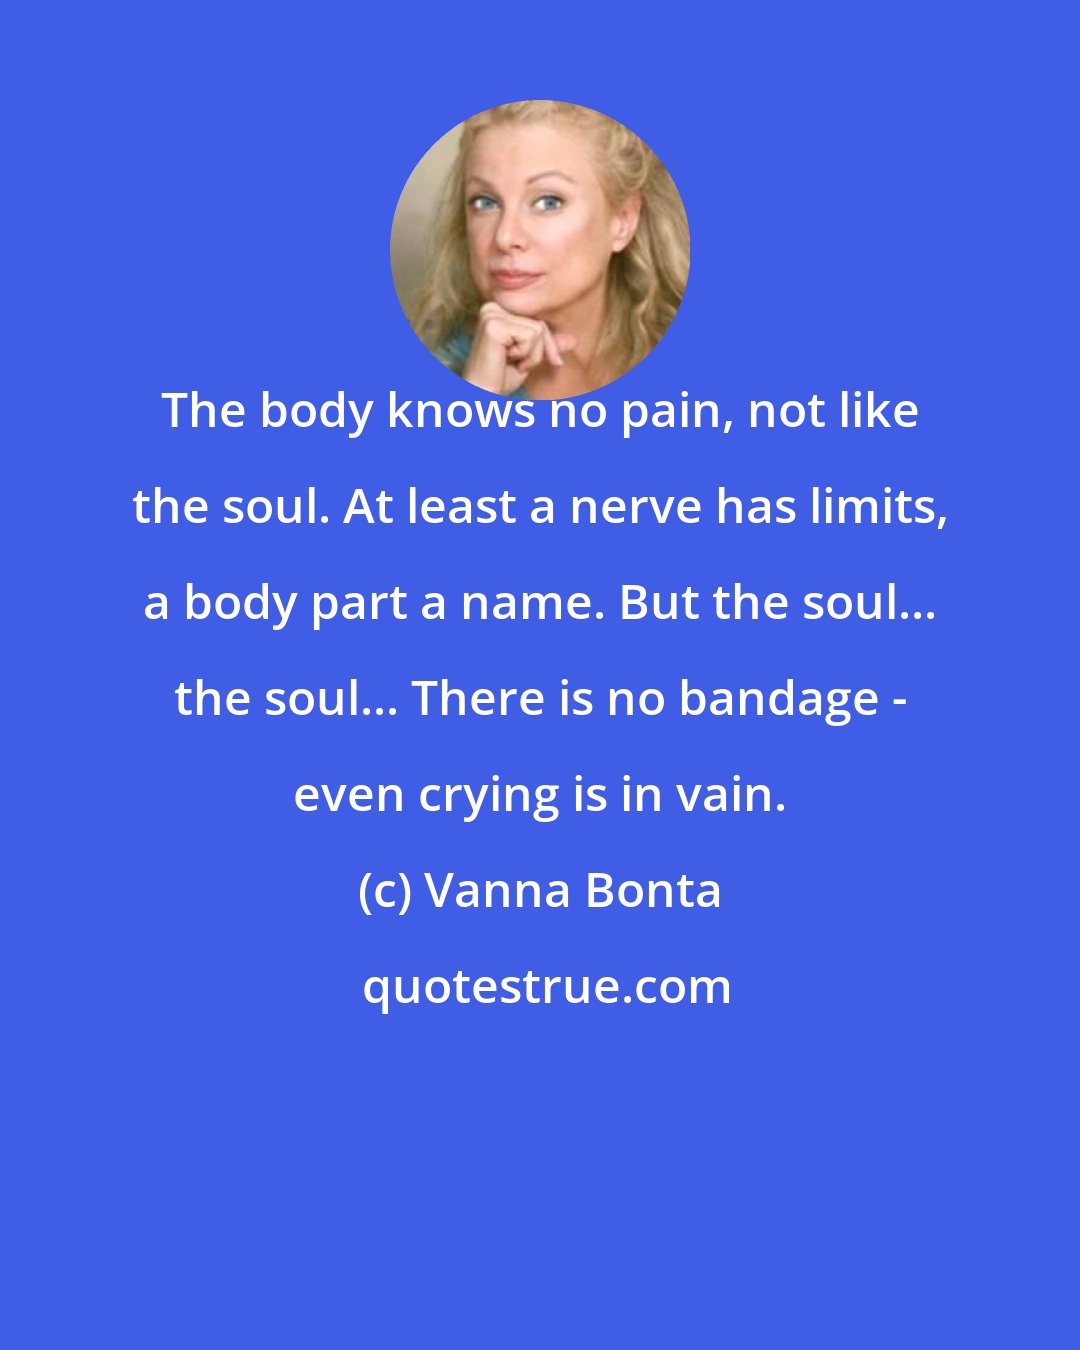 Vanna Bonta: The body knows no pain, not like the soul. At least a nerve has limits, a body part a name. But the soul... the soul... There is no bandage - even crying is in vain.